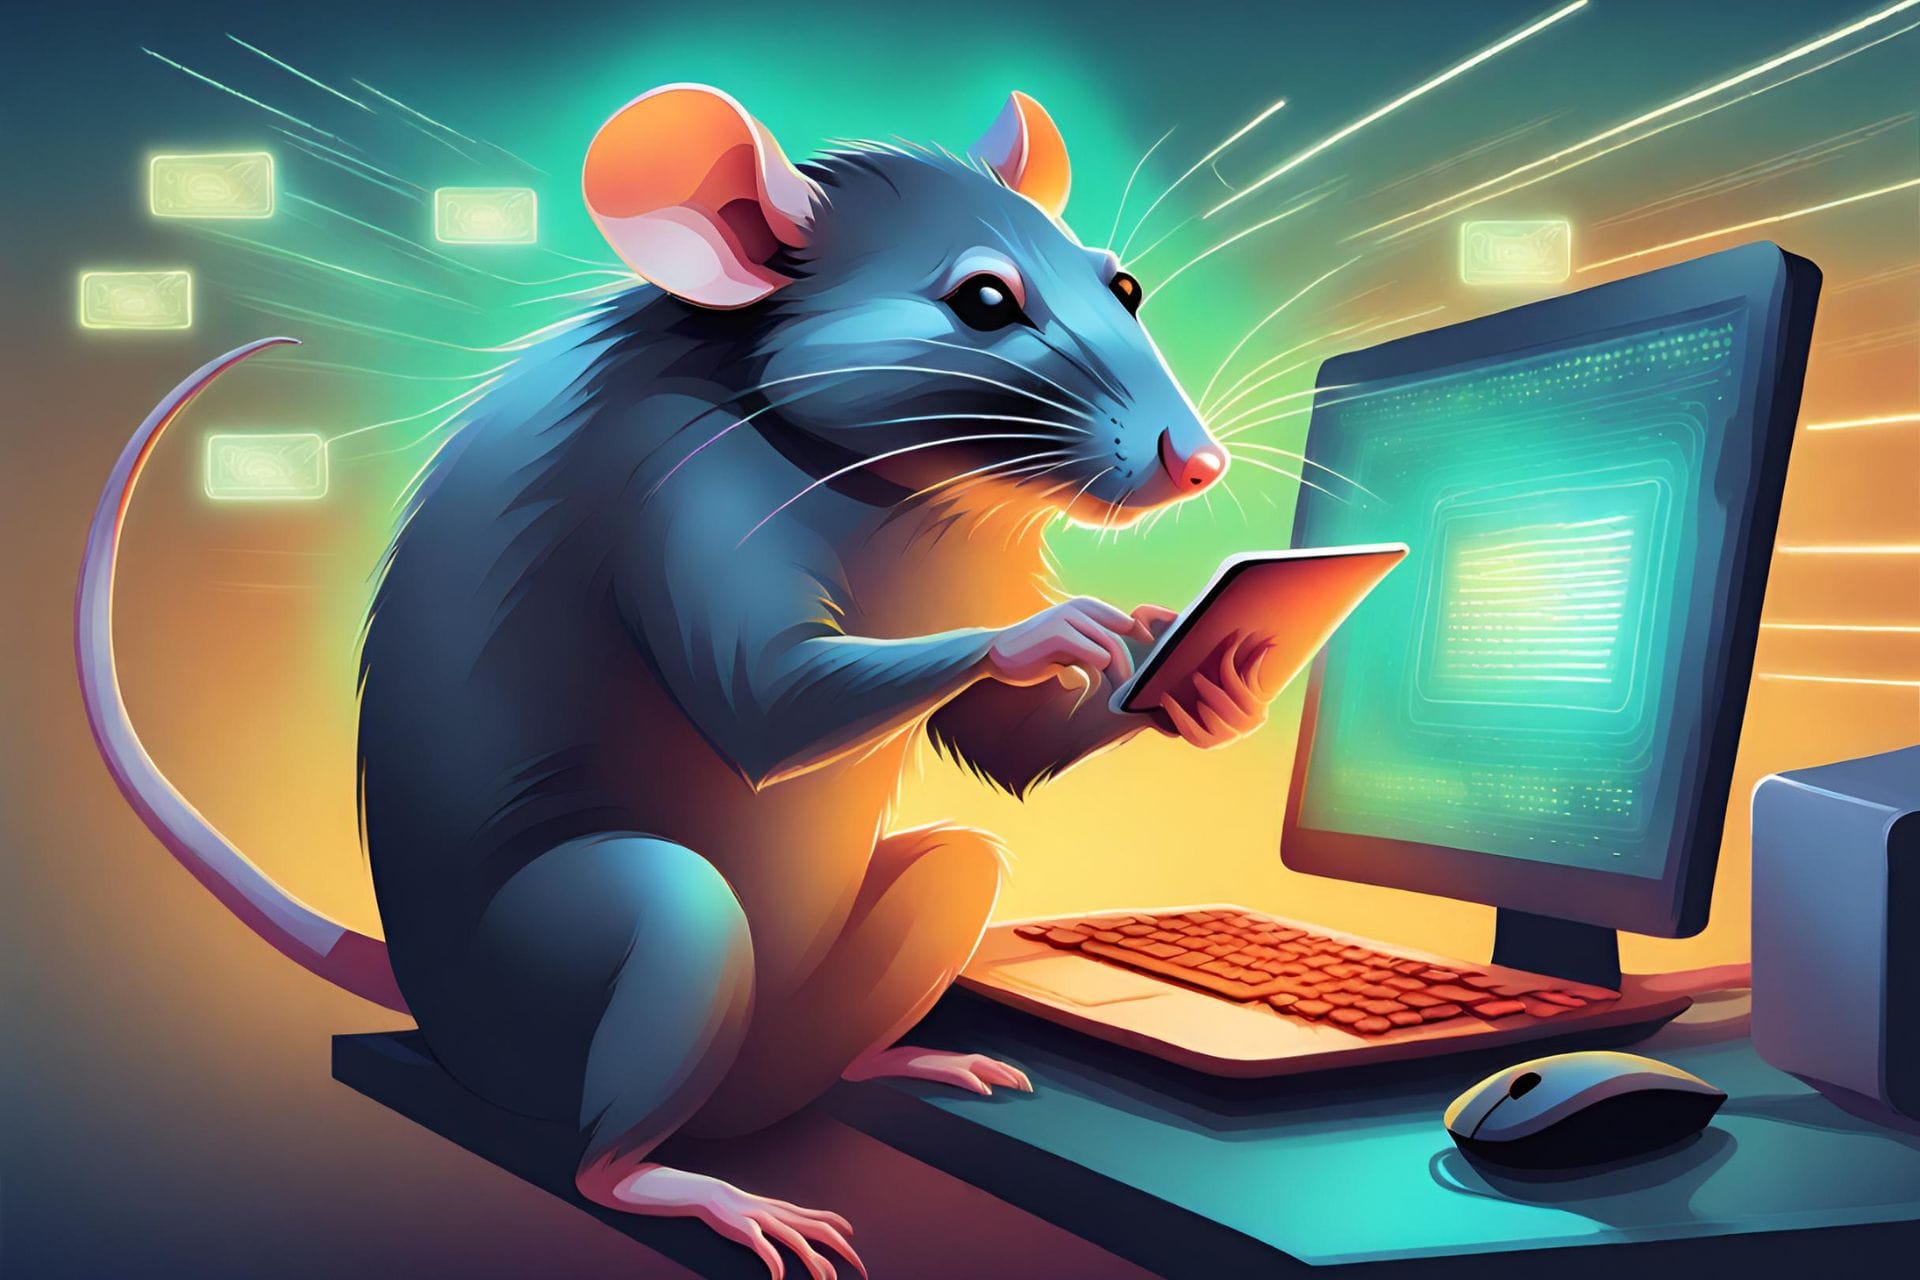 Remcos Rat malware controlling devices